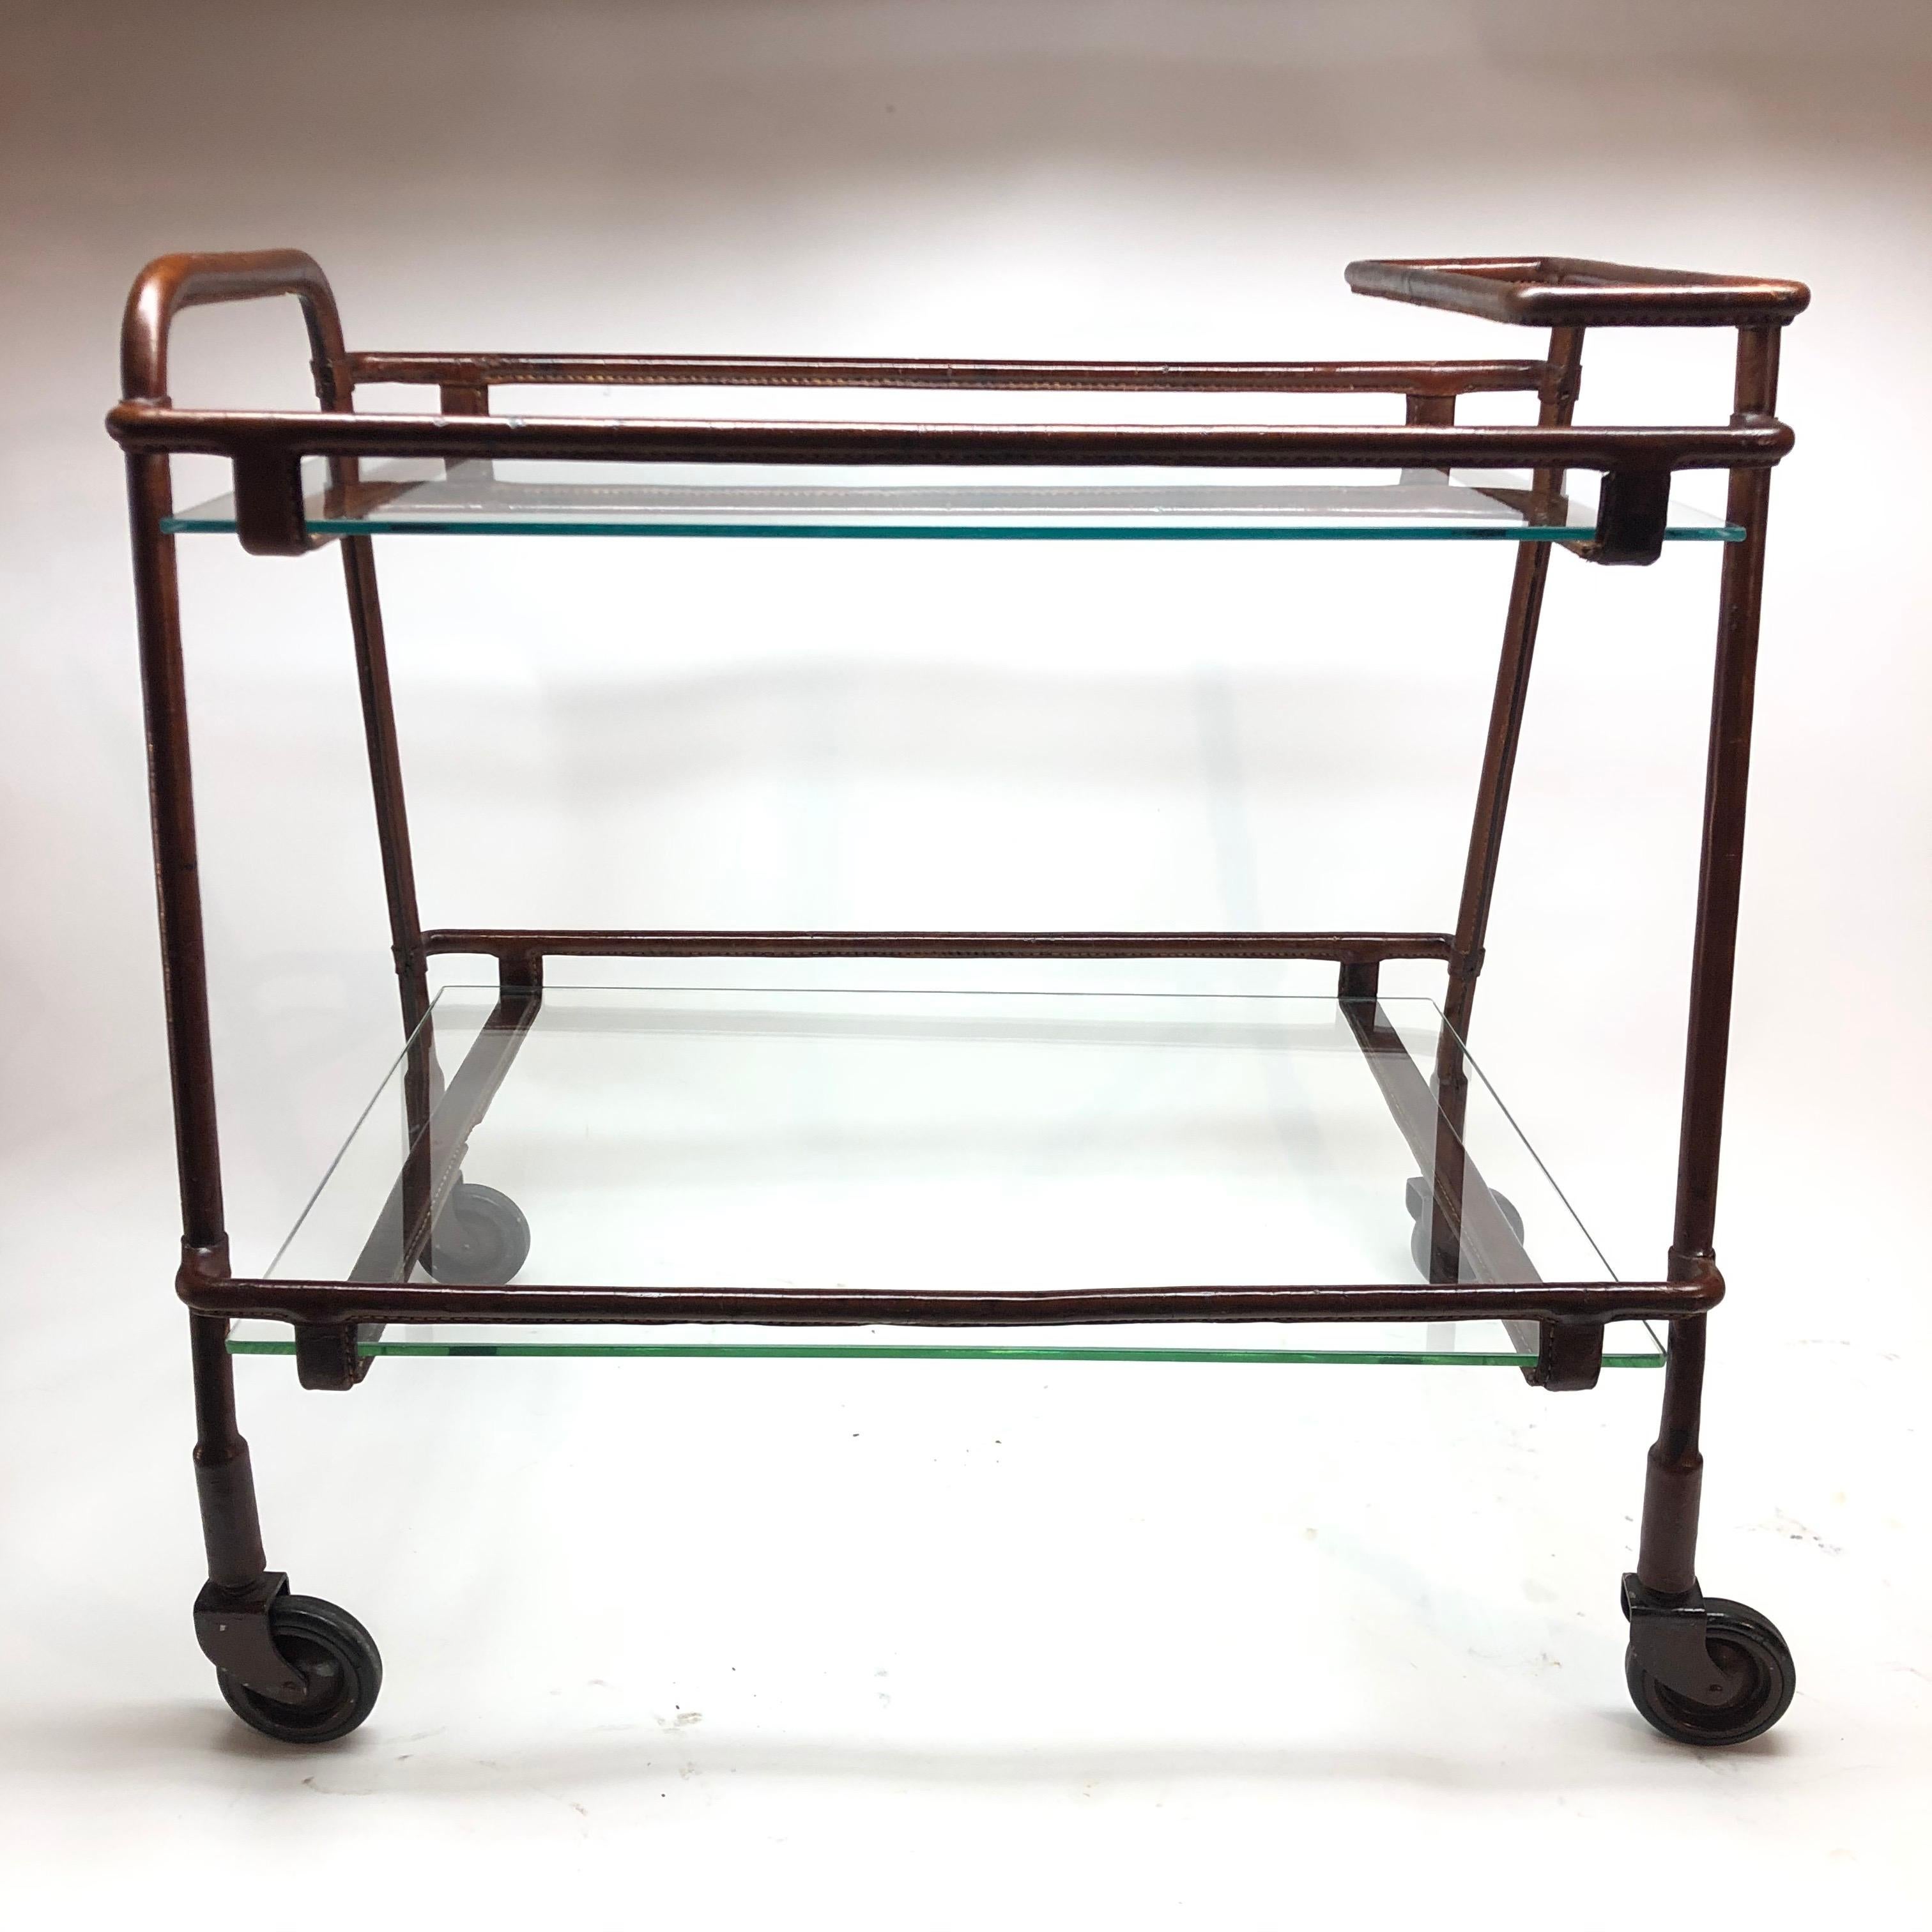 Jacques Adnet iron and leather covered bar cart / trolley. With 2 glass shelves. One stretcher has been patched as seen in photos. An extraordinary collectible piece.